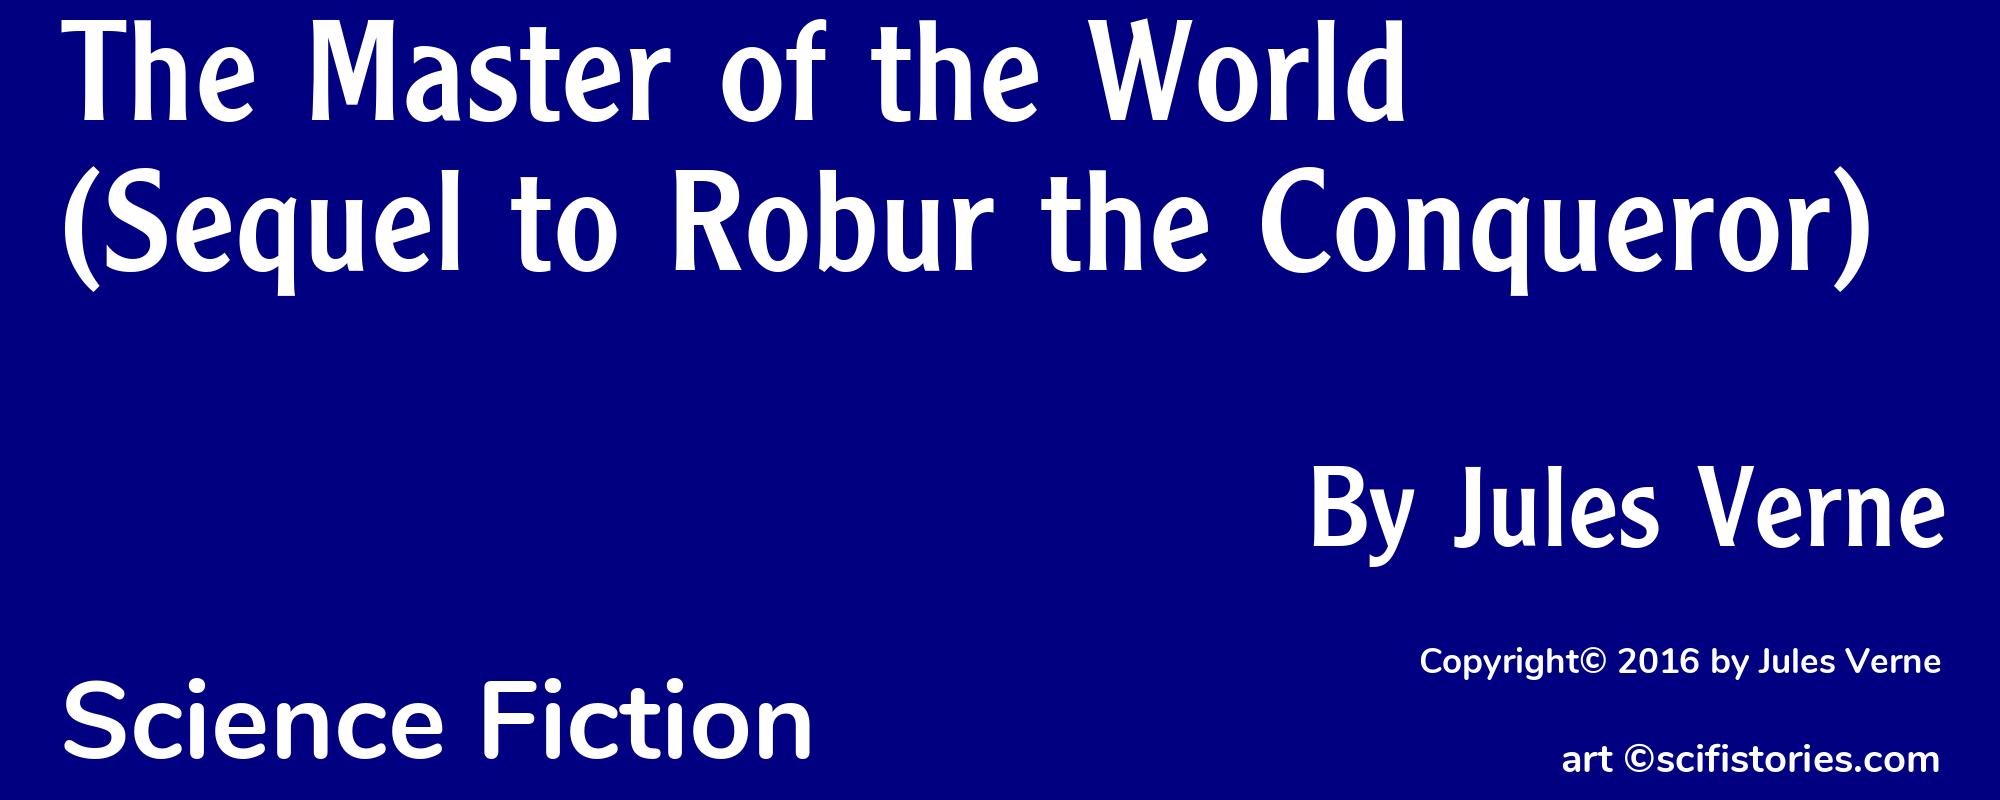 The Master of the World (Sequel to Robur the Conqueror) - Cover